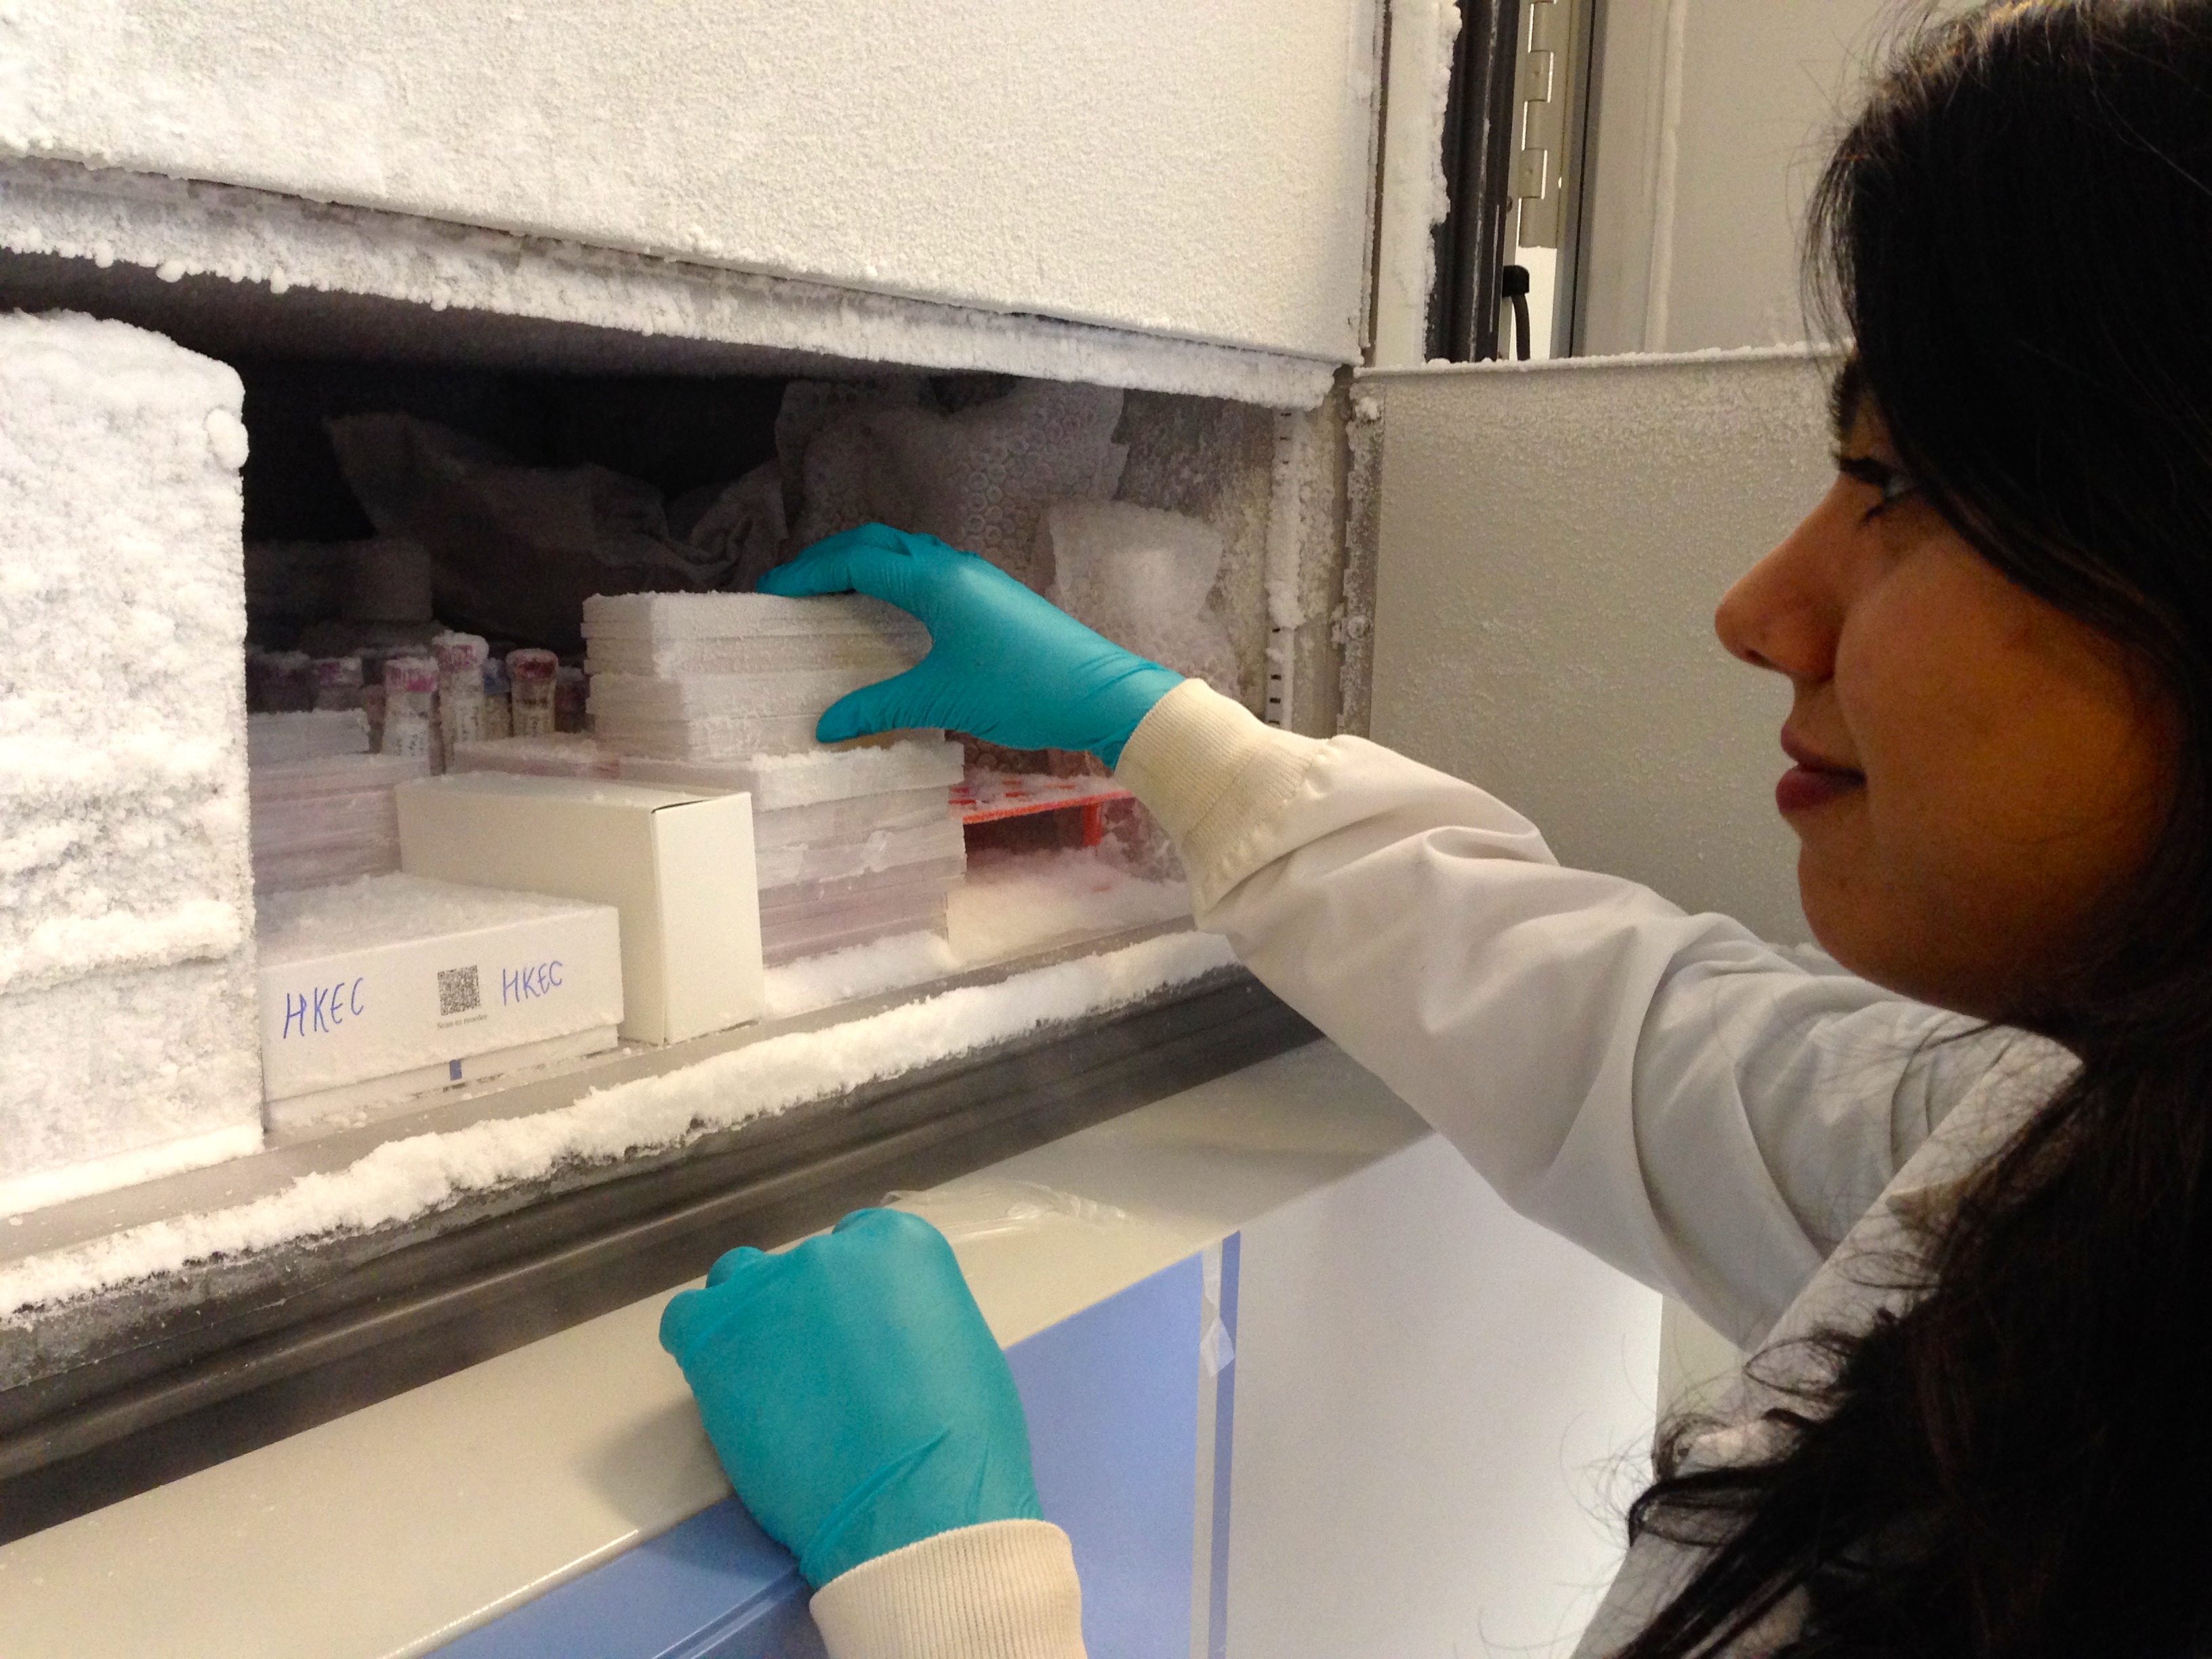 At Second Genome, hundreds of stool samples from patients with IBD and other diseases are stored in freezers. (Amy Standen/KQED)